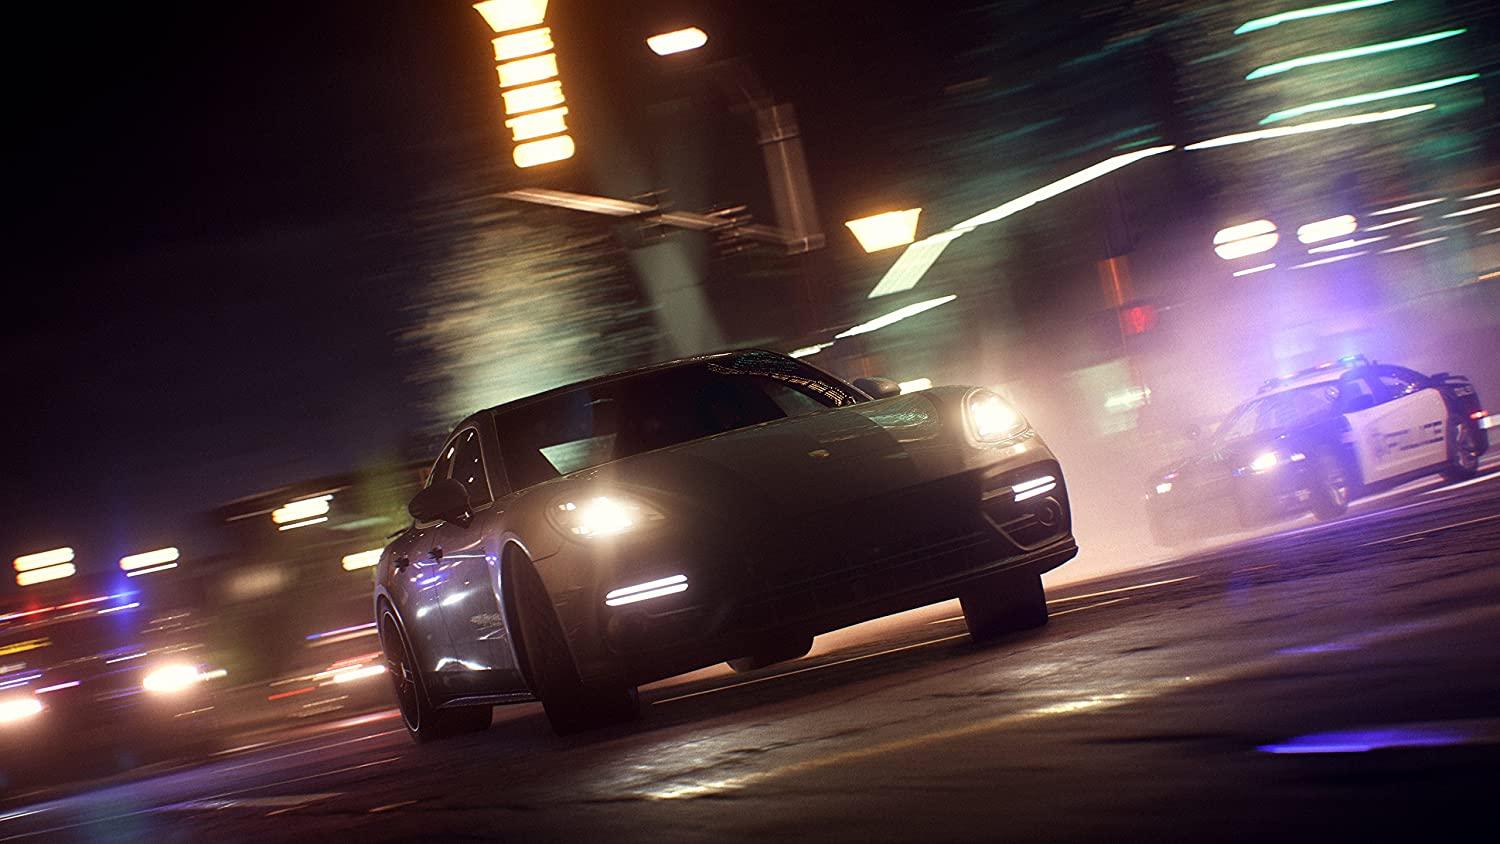 Need for Speed Payback PS4-Games-dealsplant